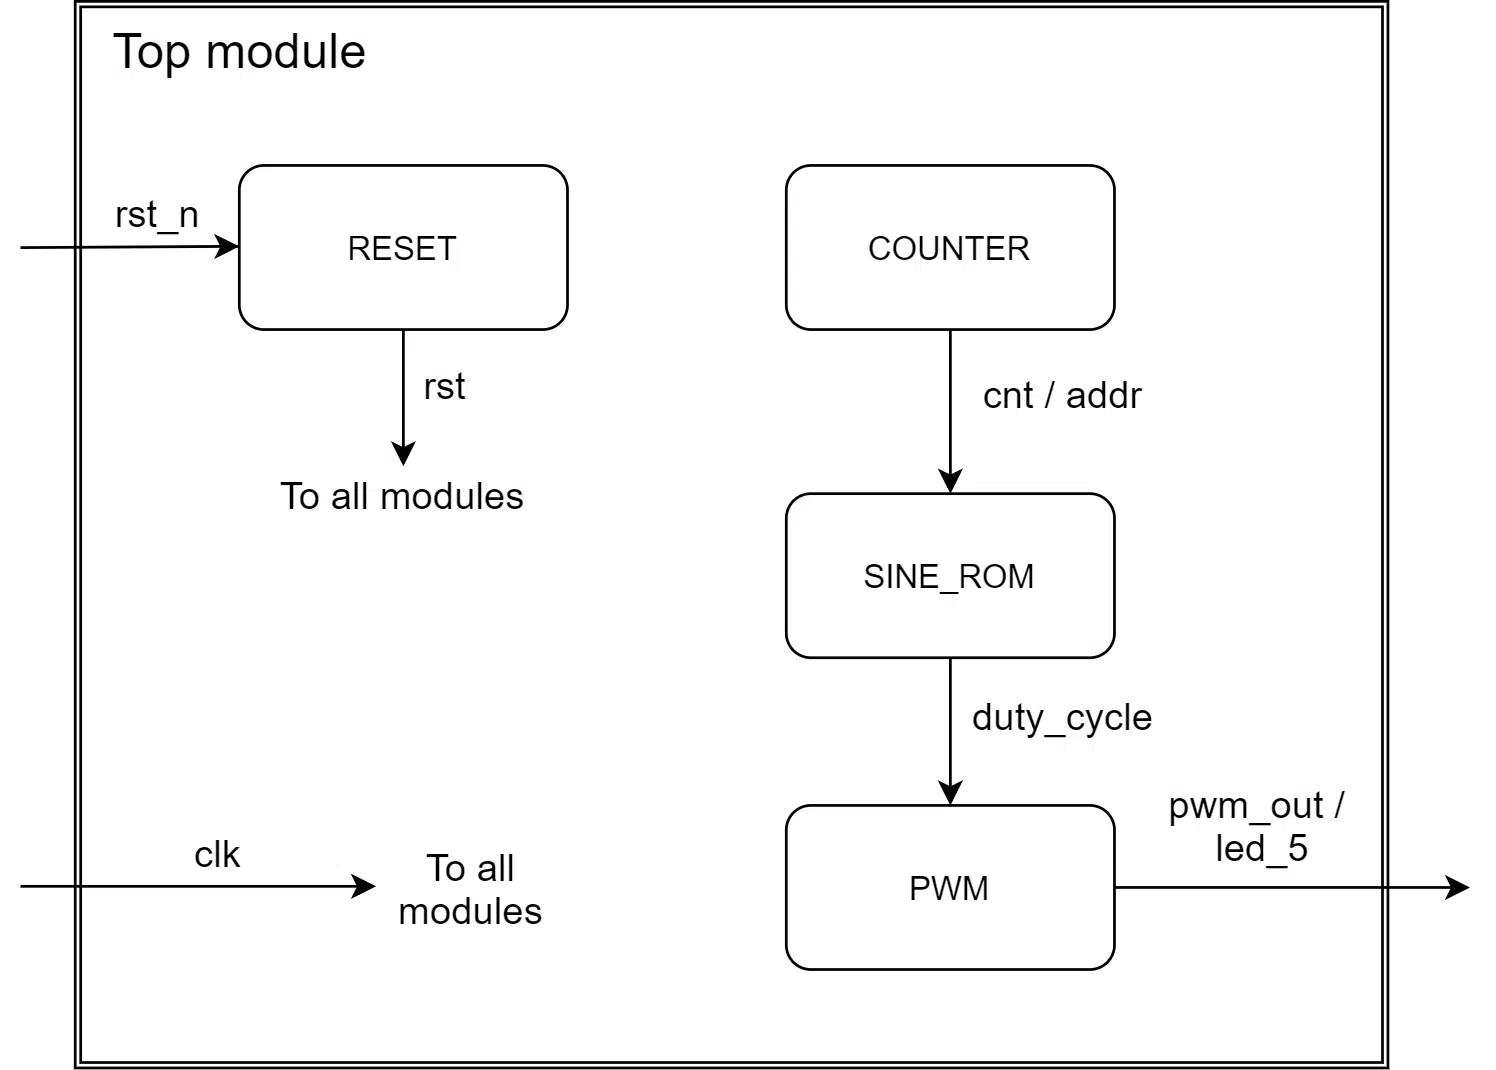 Data flow chart of the top module